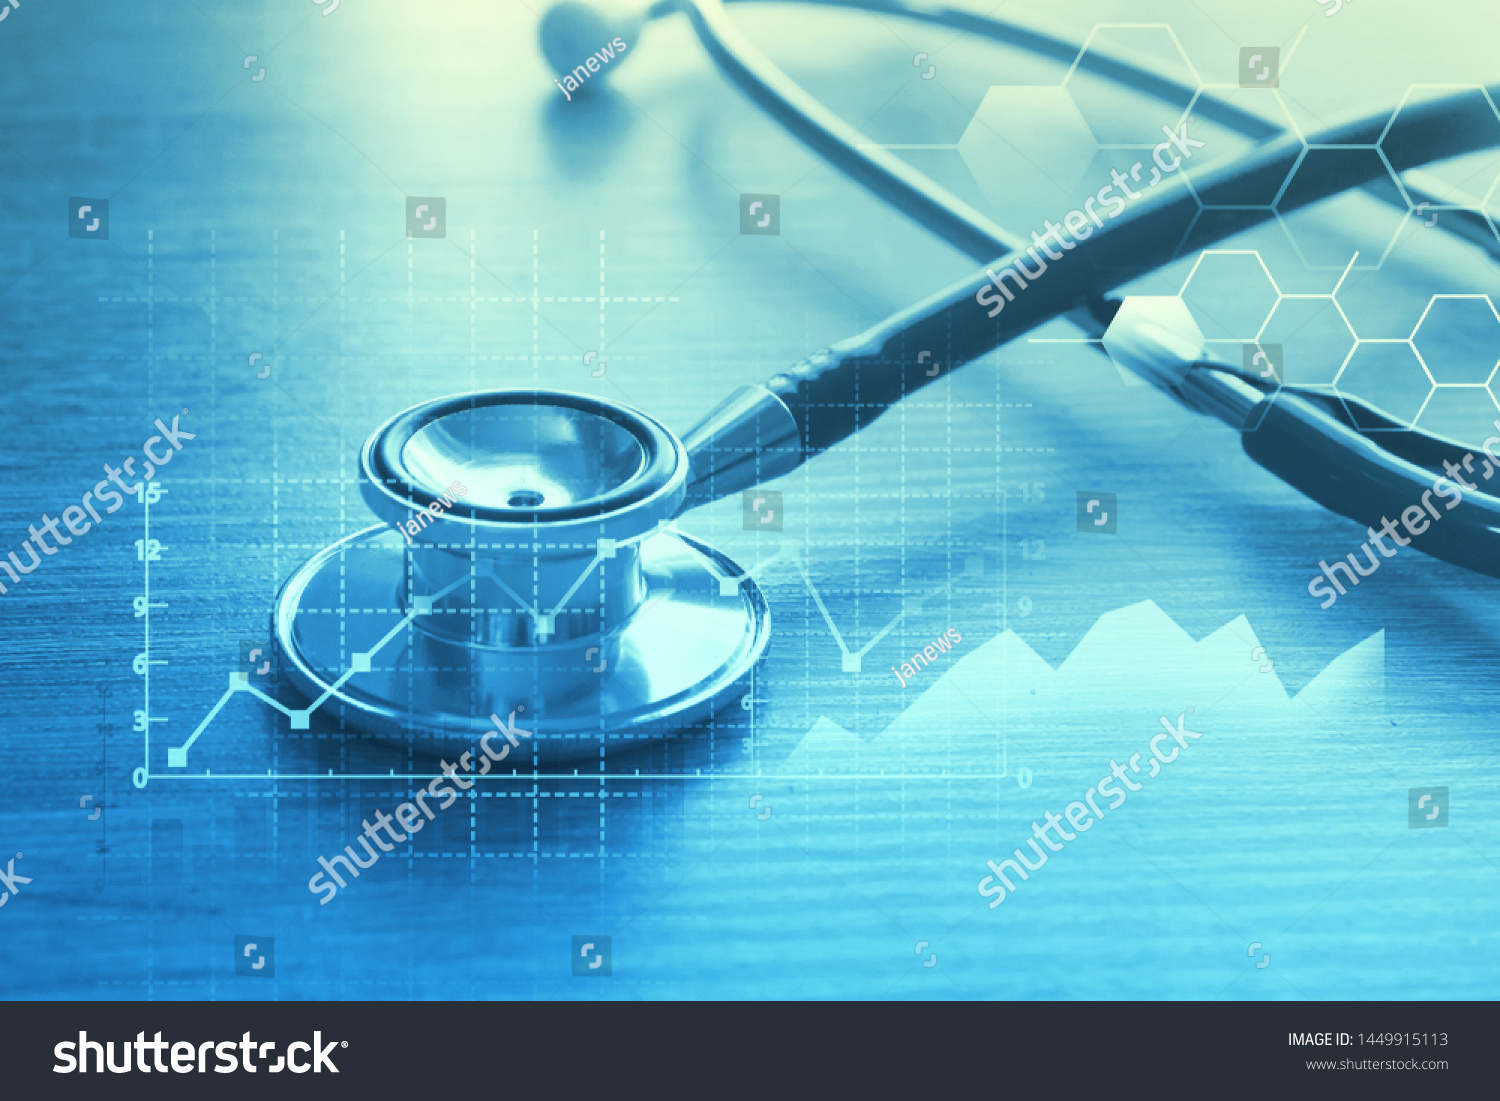 Medical examination and healthcare business concept, Big Data for health analytics,  health insurance marketing strategy #1449915113